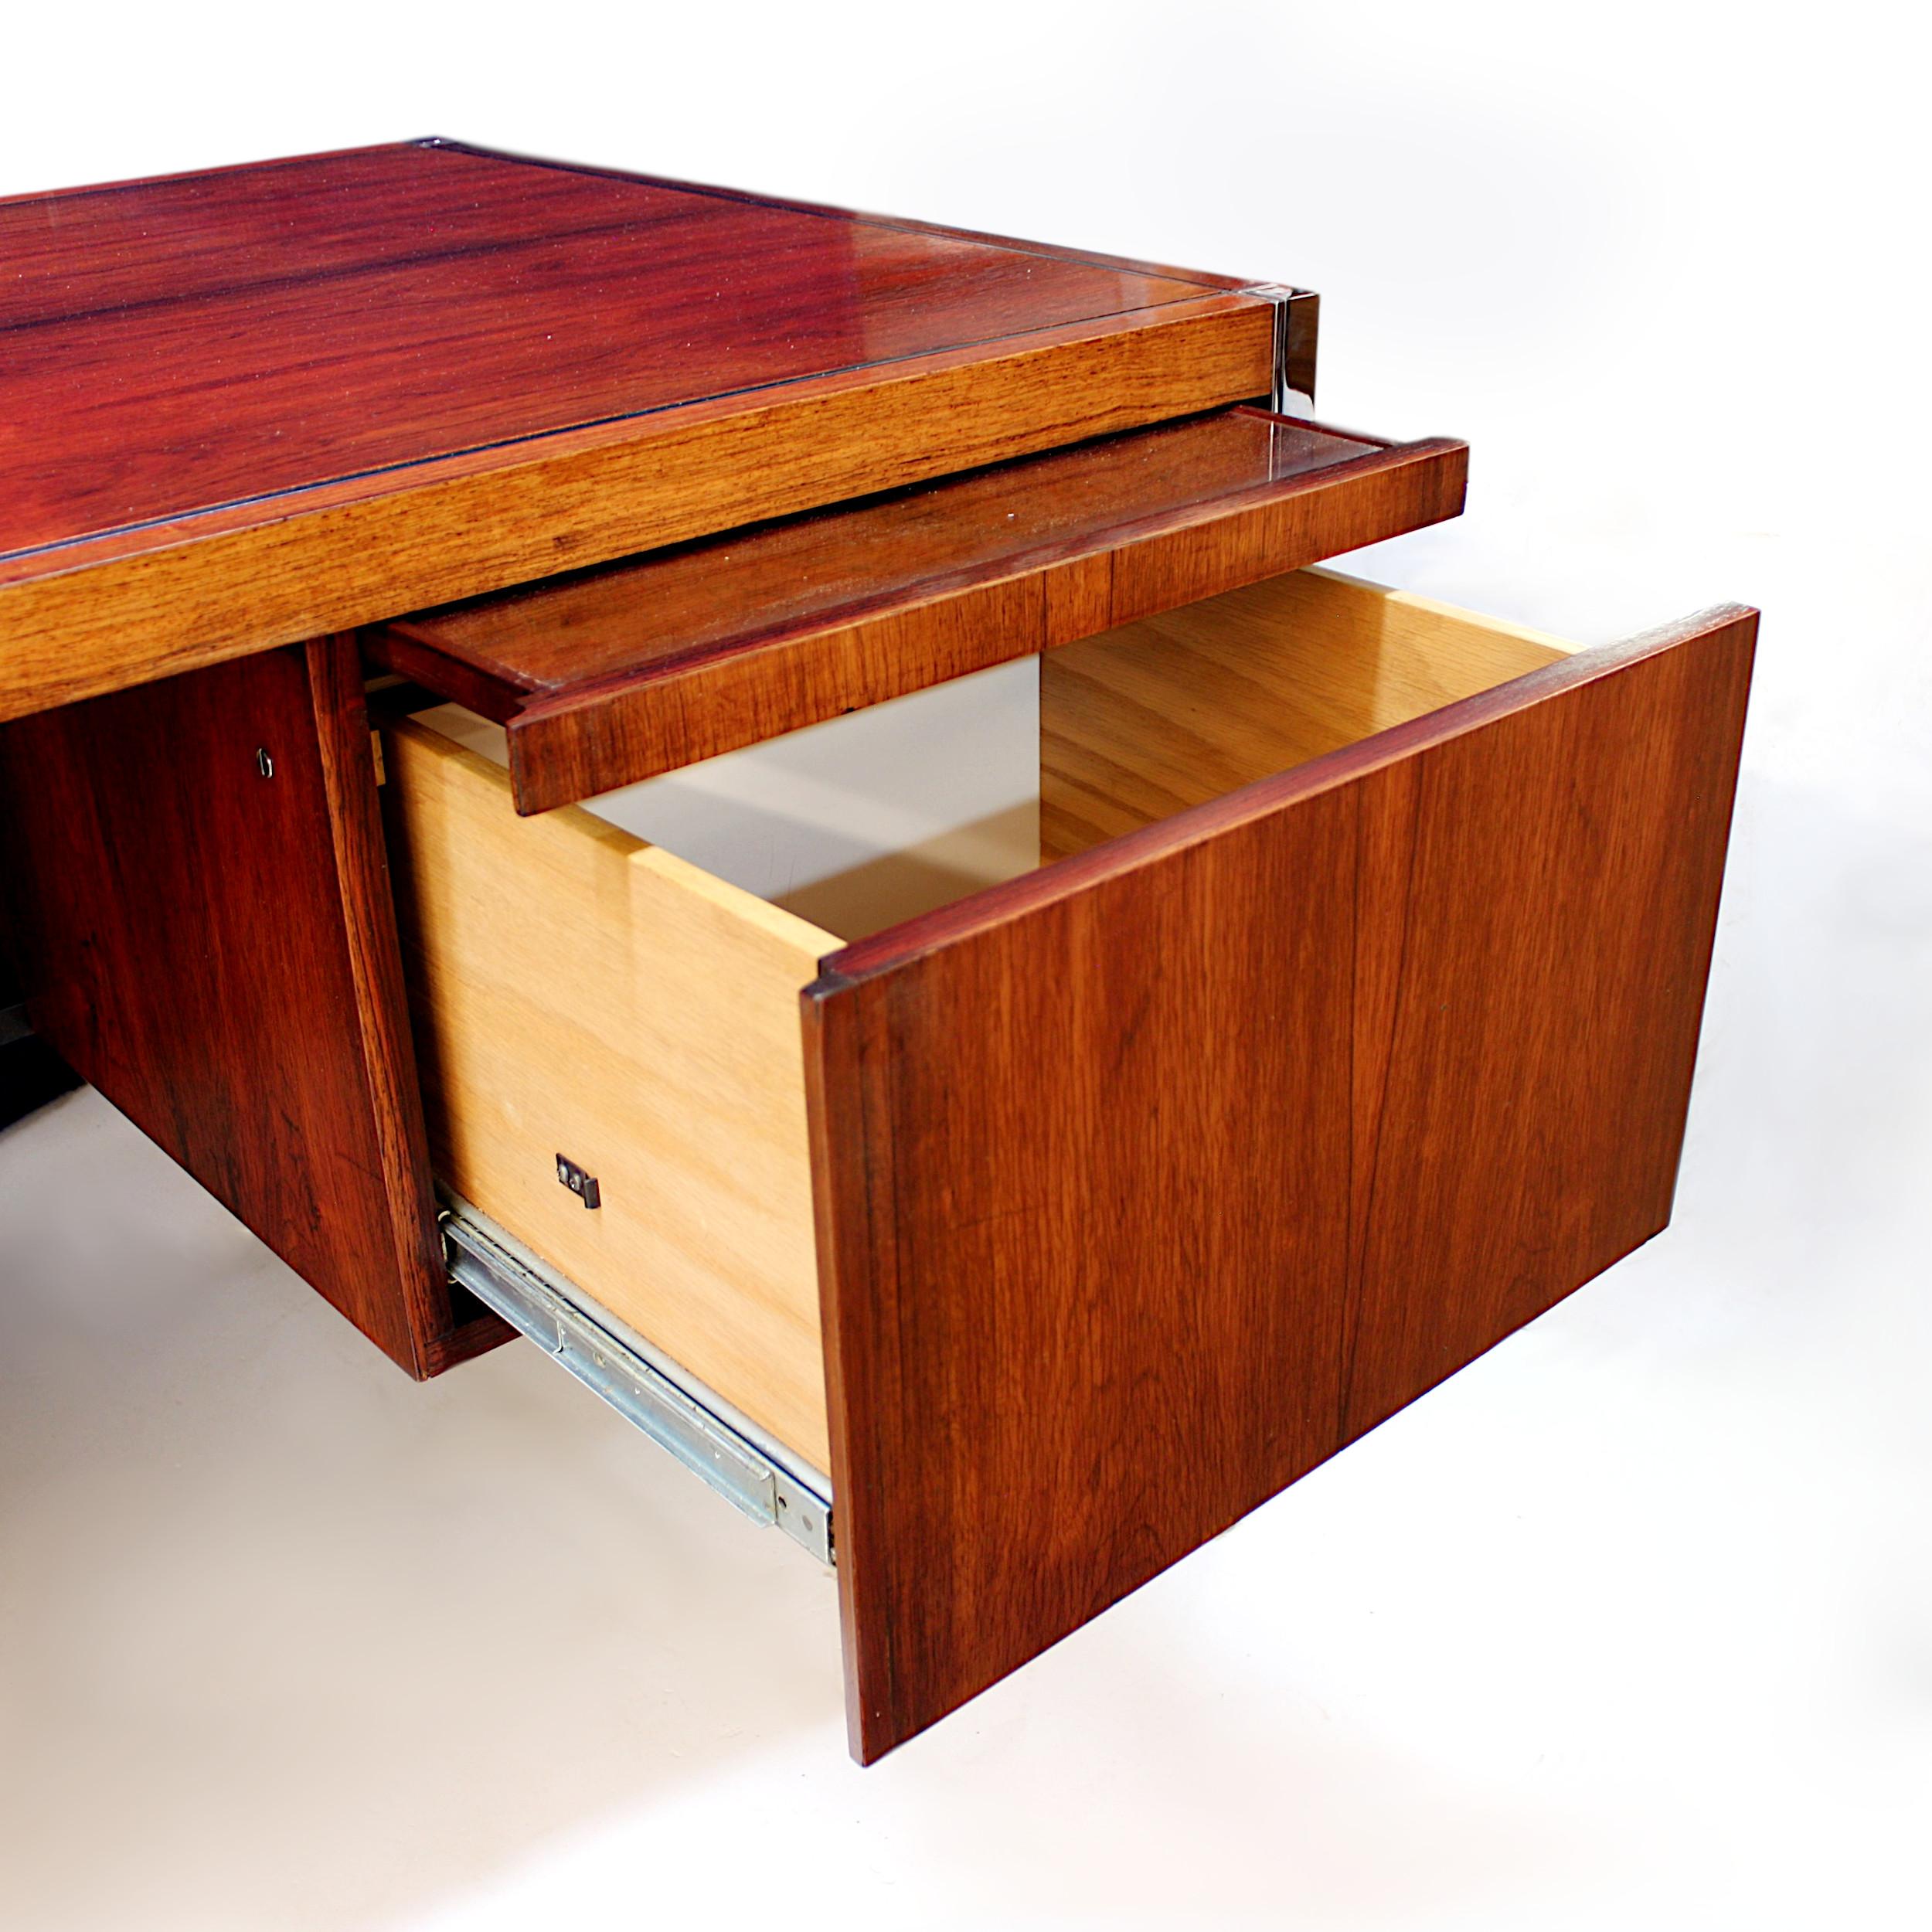 1970s Mid-Century Modern Rosewood Executive Desk by Richard Schultz for Knoll 1